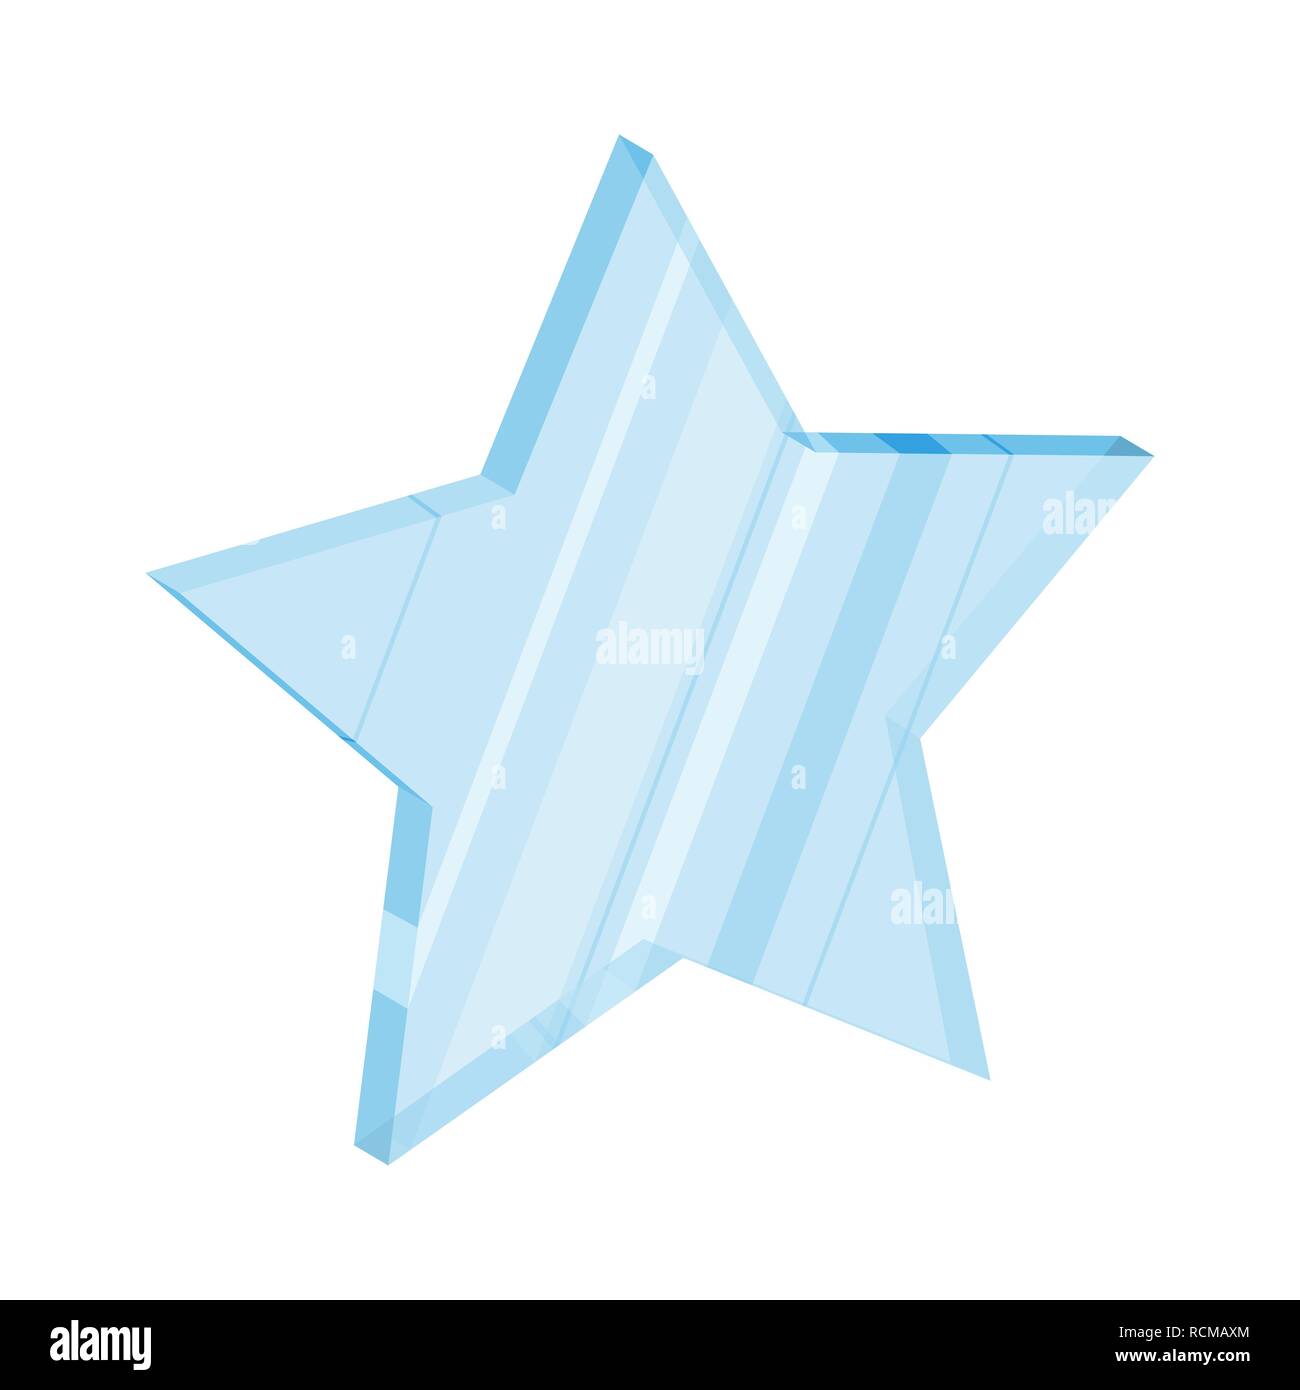 Glass star icon in flat design. Vector illustration. Star isolated on white background Stock Vector